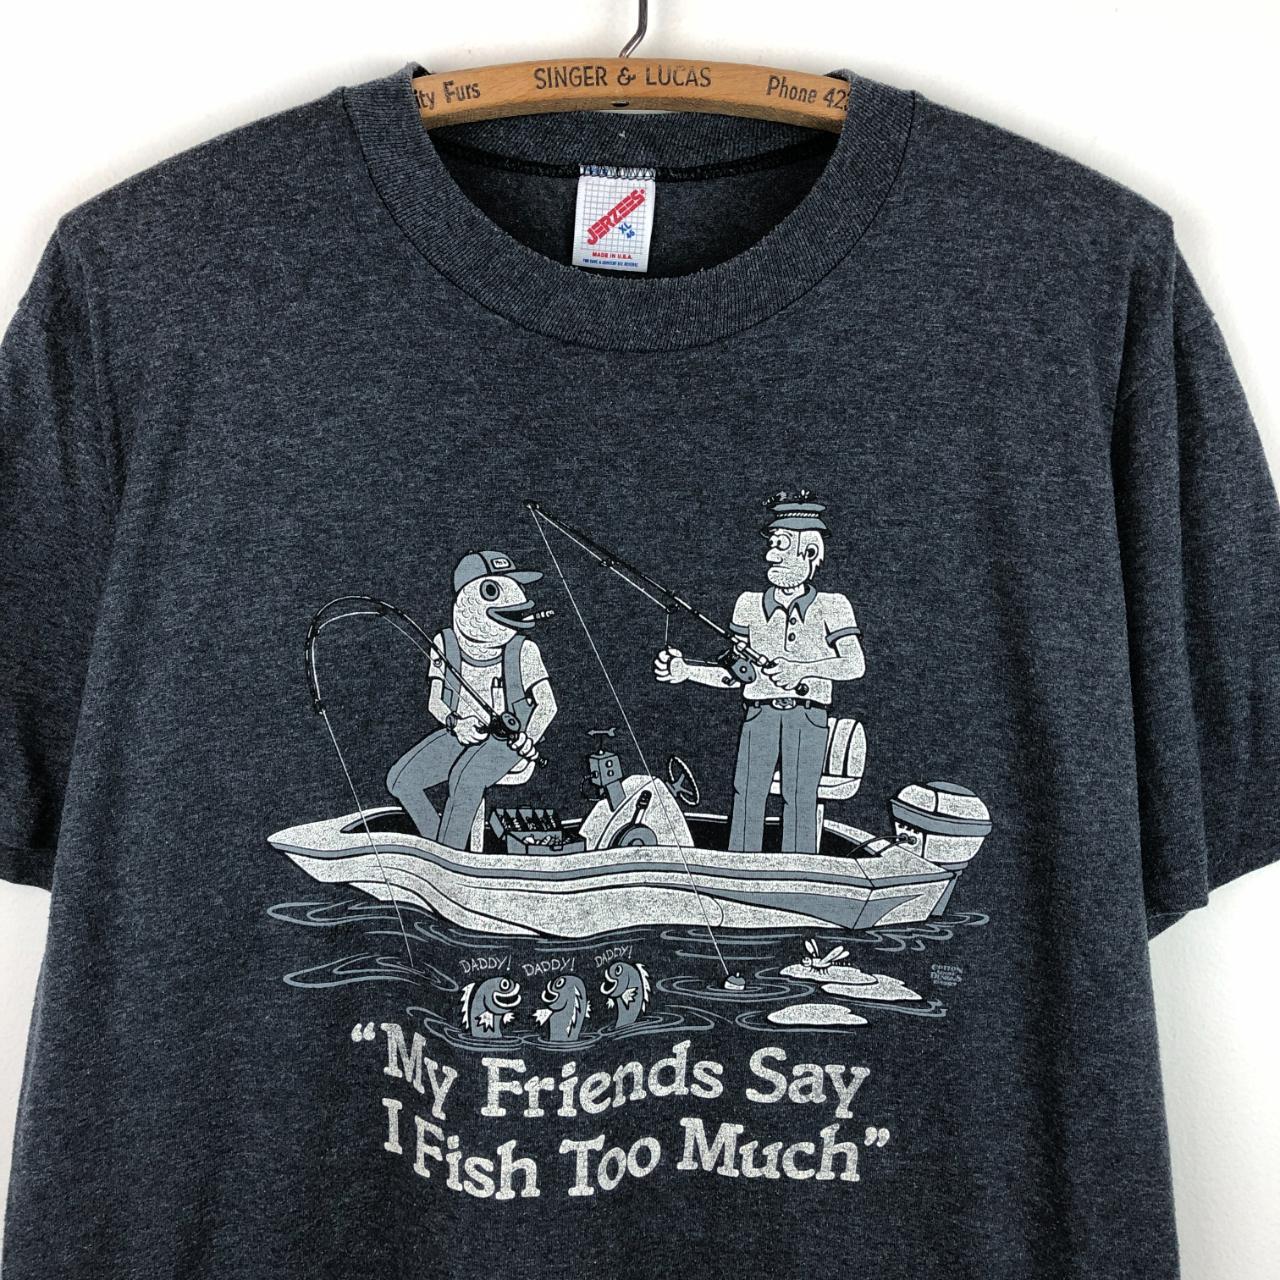 Vintage 90s My friends say I fish too much funny